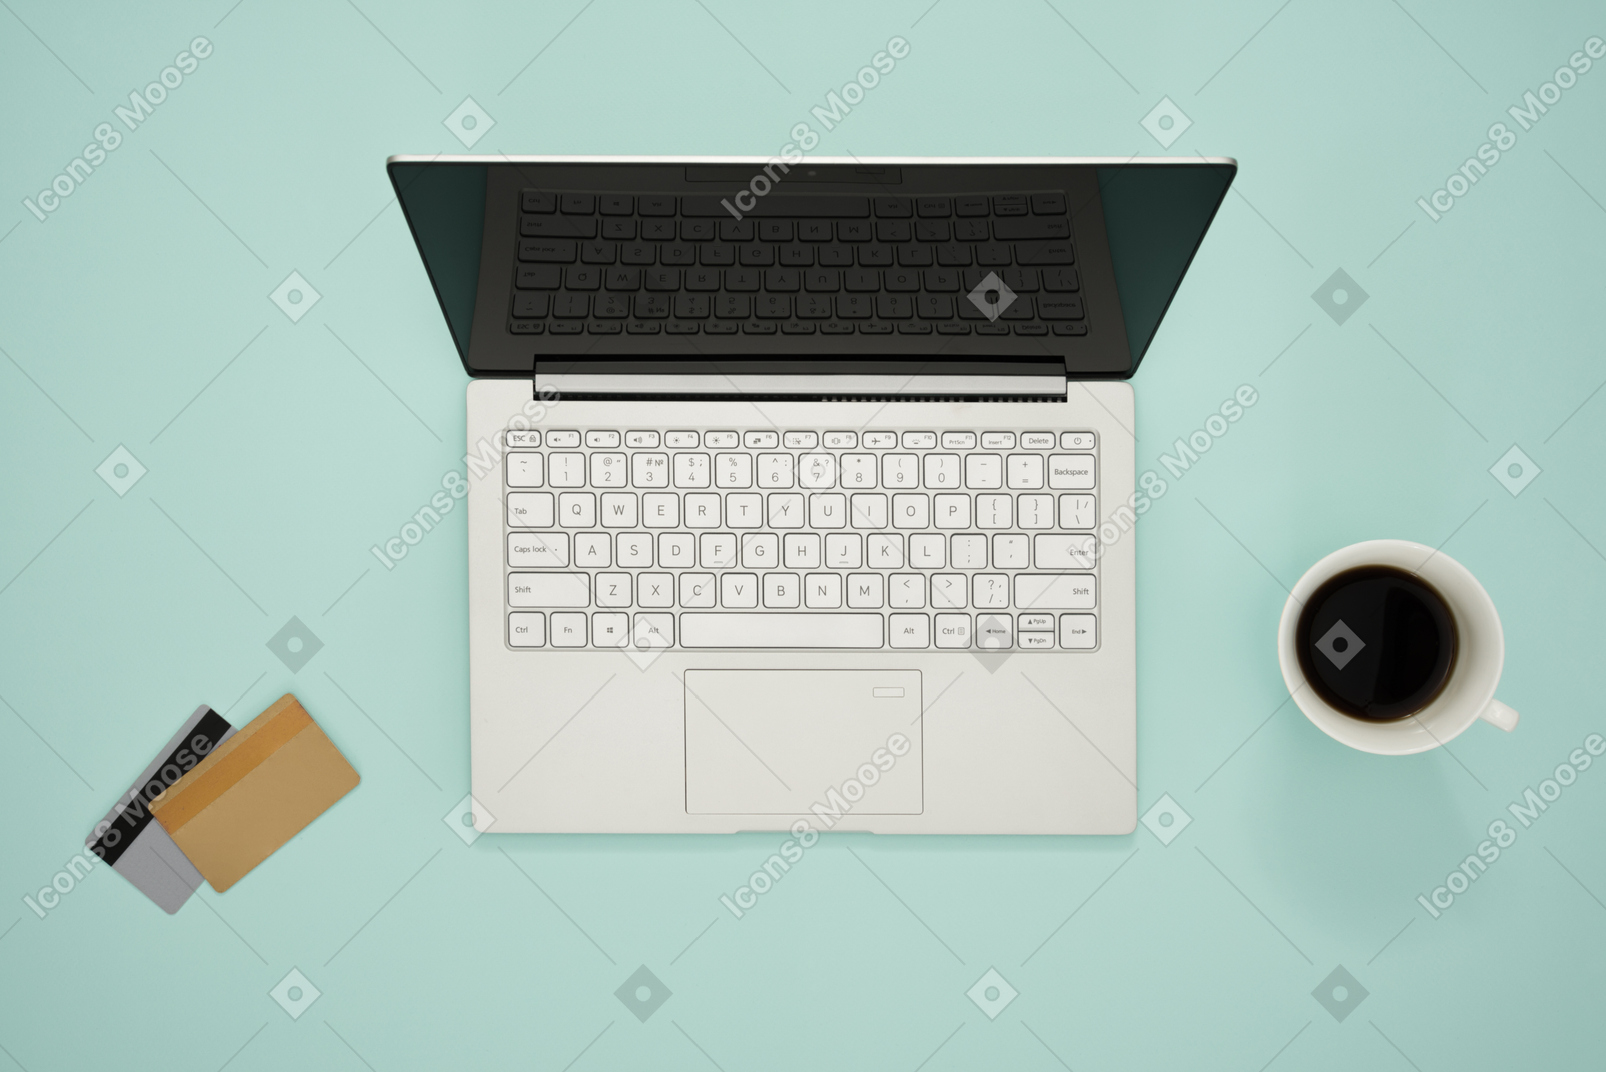 Laptop and credit cards on a turquoise background